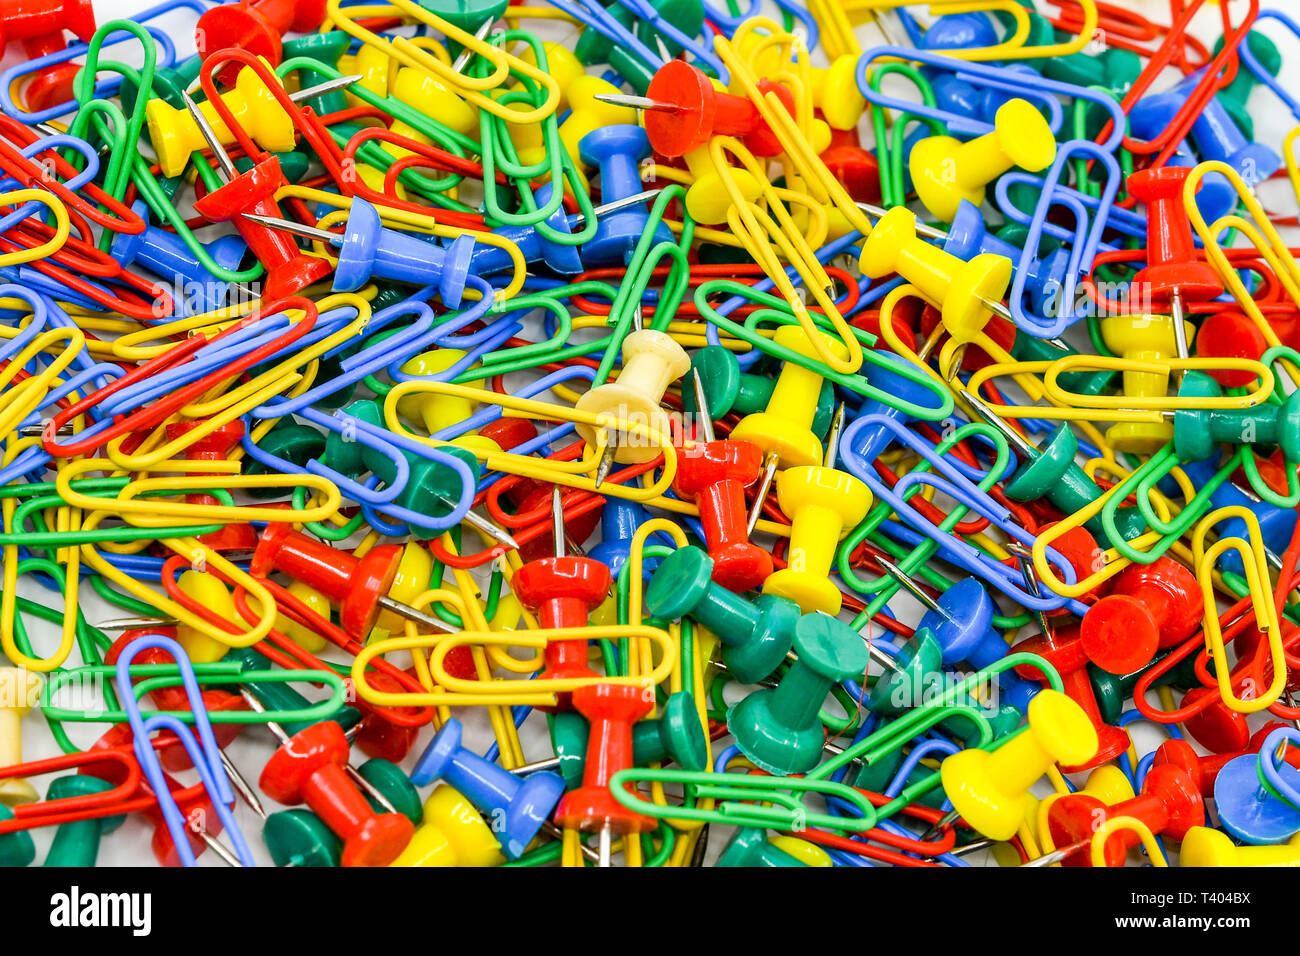 Multicolored paper clips and plastic drawing pins Stock Photo - Alamy